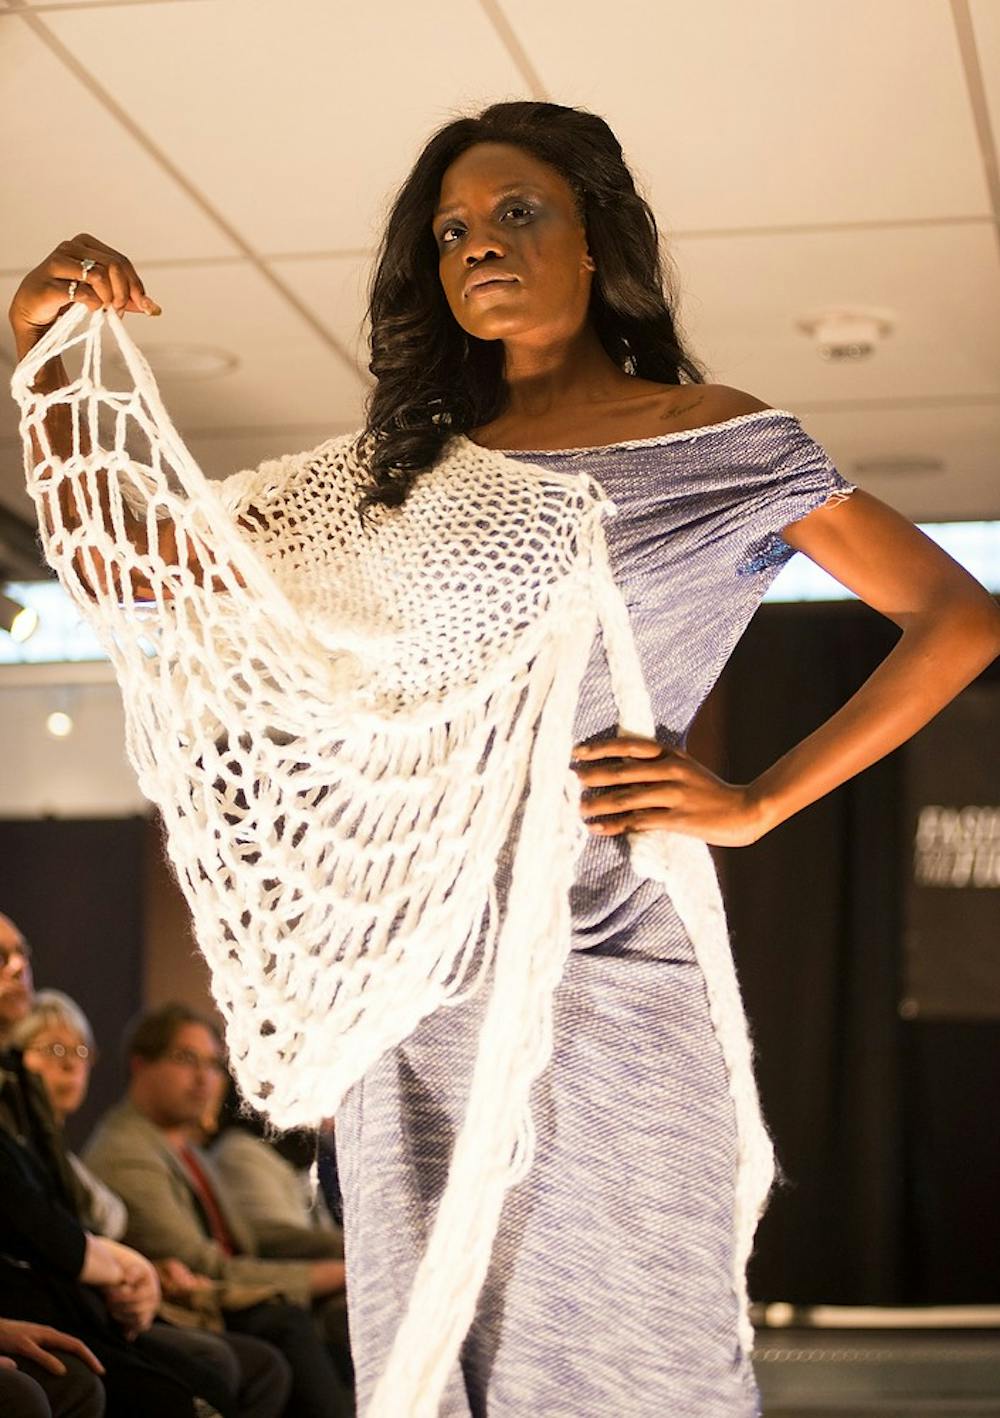 <p>A model walks down the runway Saturday during the "Fashion for the Fire" fashion show at the Runway in downtown Lansing on S. Washington Square. The show's purpose is to raise proceeds to provide healing services to children who have survived sexual trauma in the community. Hannah Levy/The State News</p>